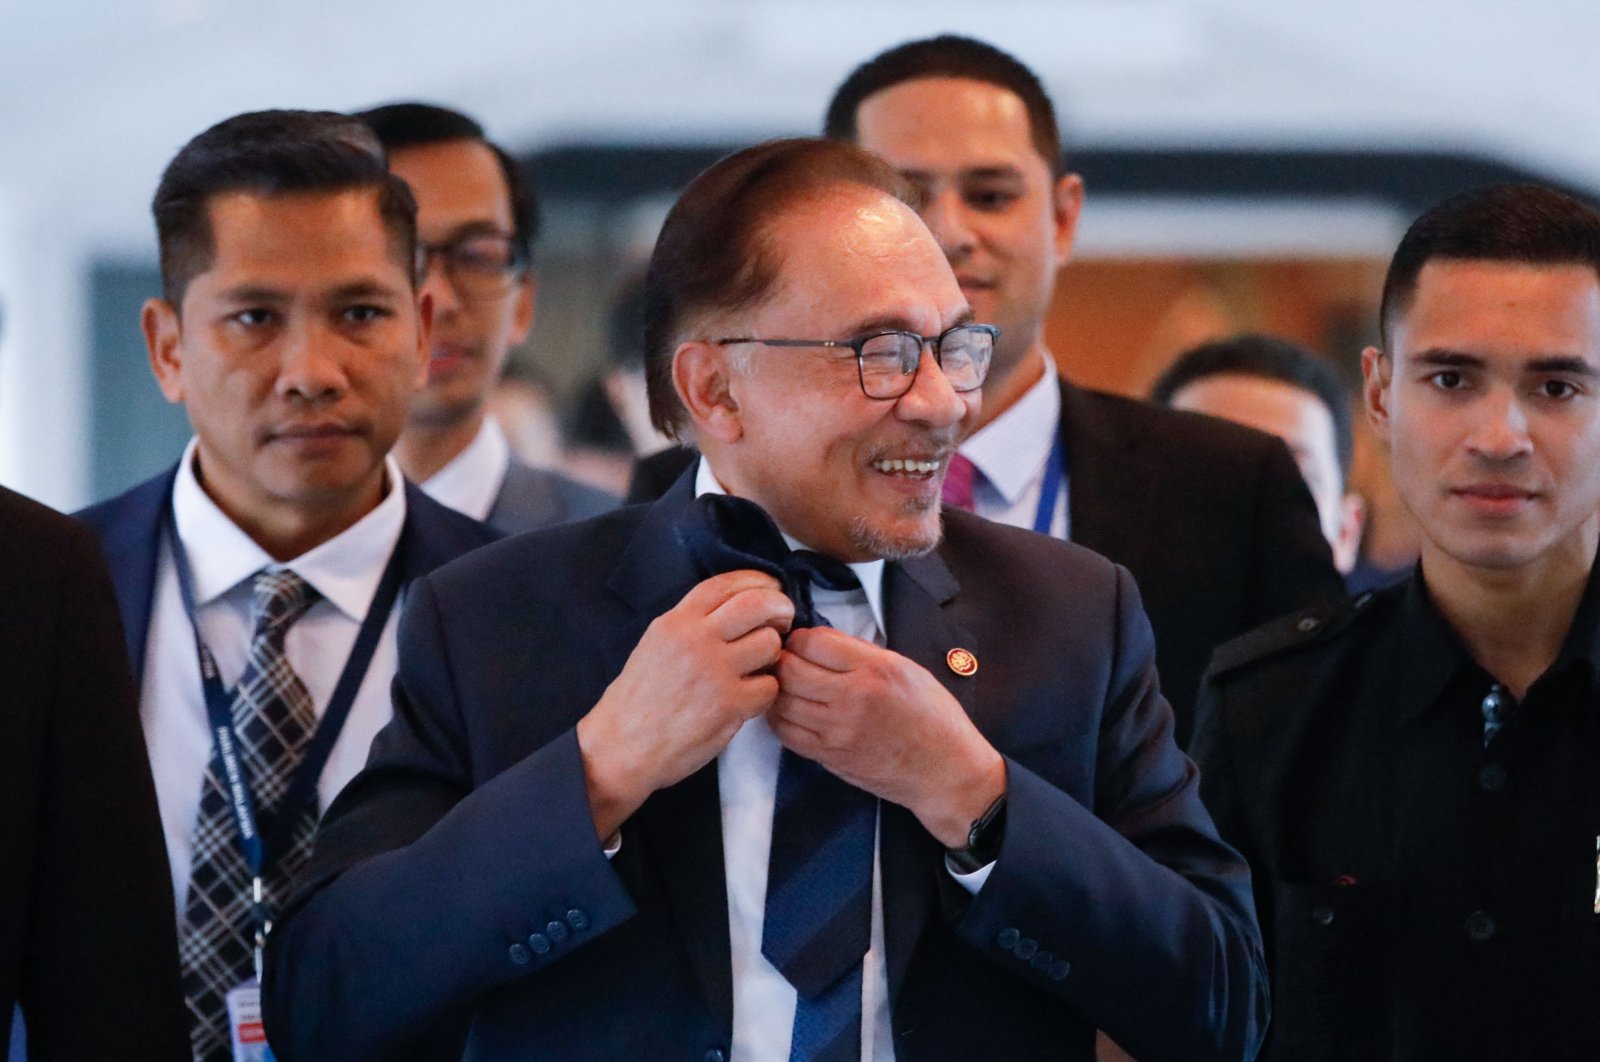 Malaysia Prime Minister Anwar Ibrahim leaves the lower house of parliament after receiving a vote of confidence, in Kuala Lumpur on Dec. 19, 2022. (AFP Photo)